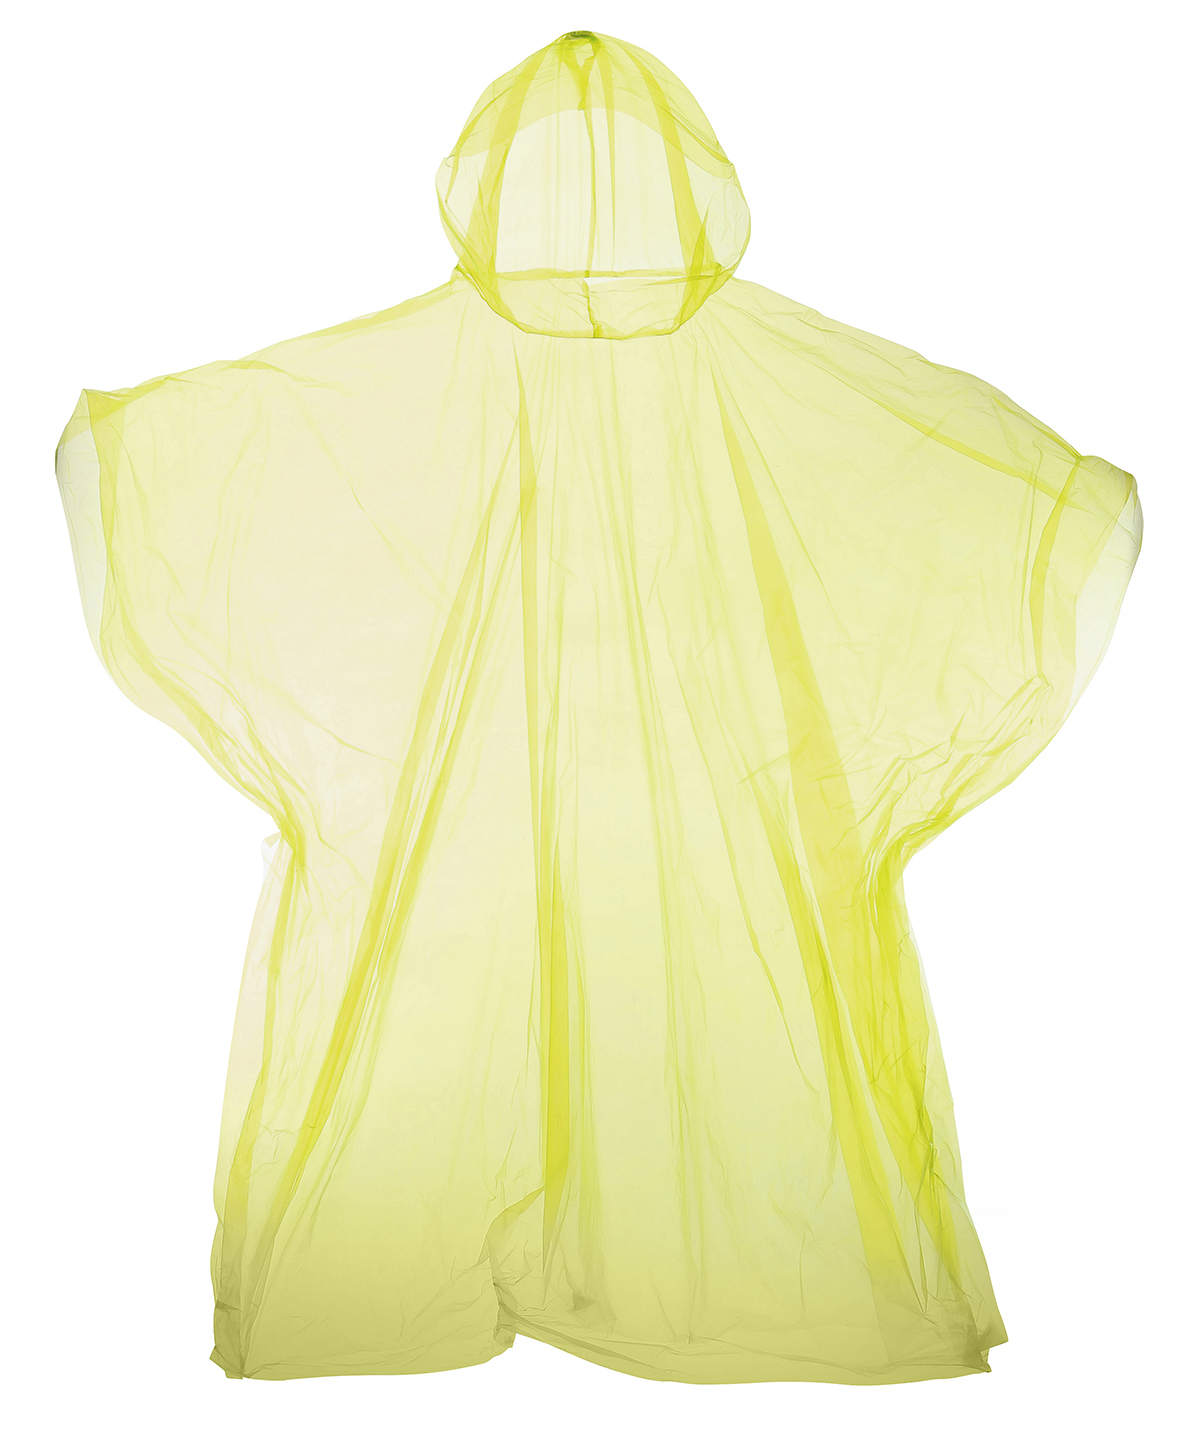 Emergency Hooded Plastic Poncho Yellow Size One Size